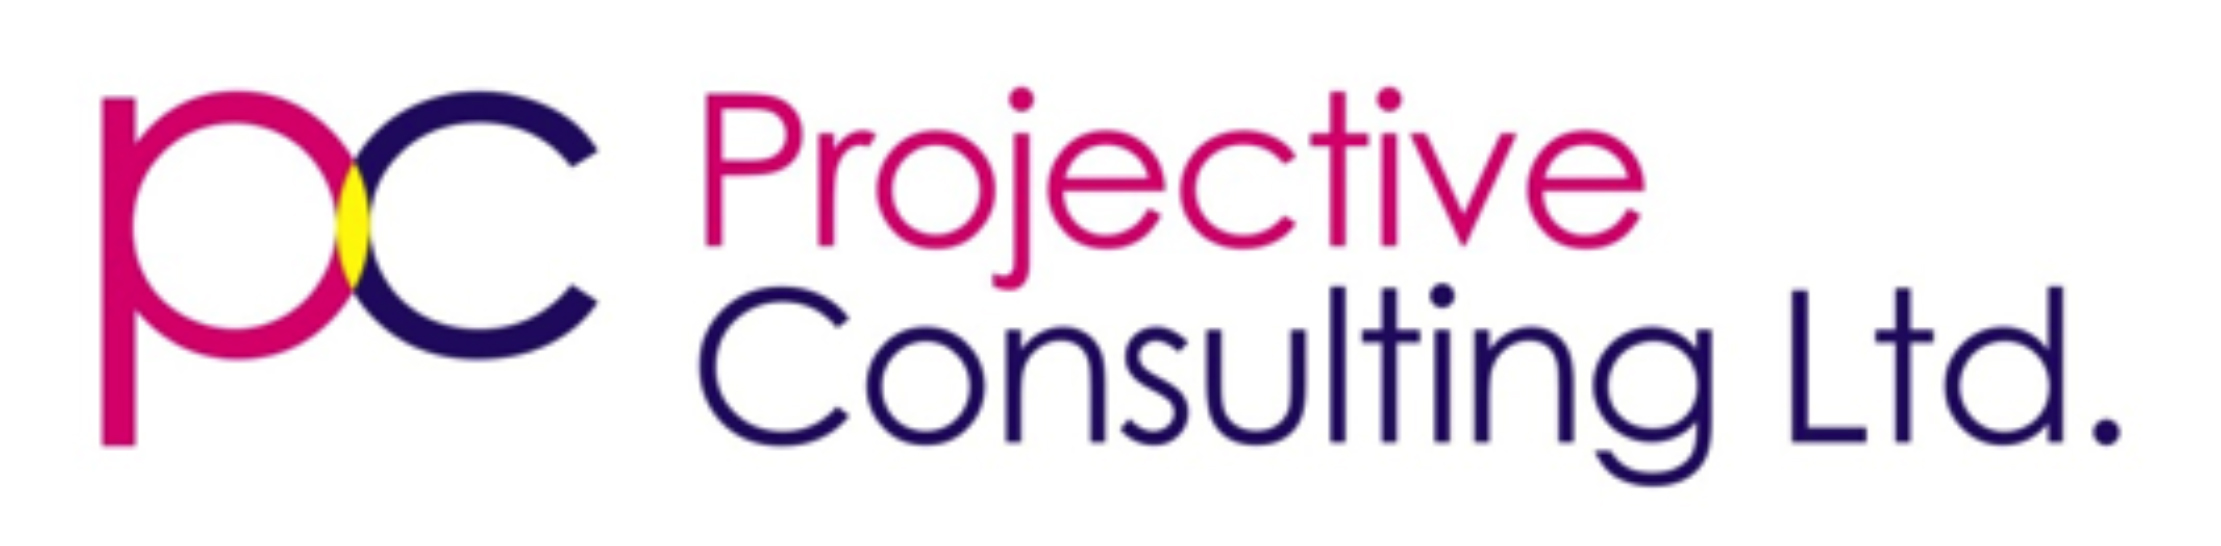 Projective Consulting